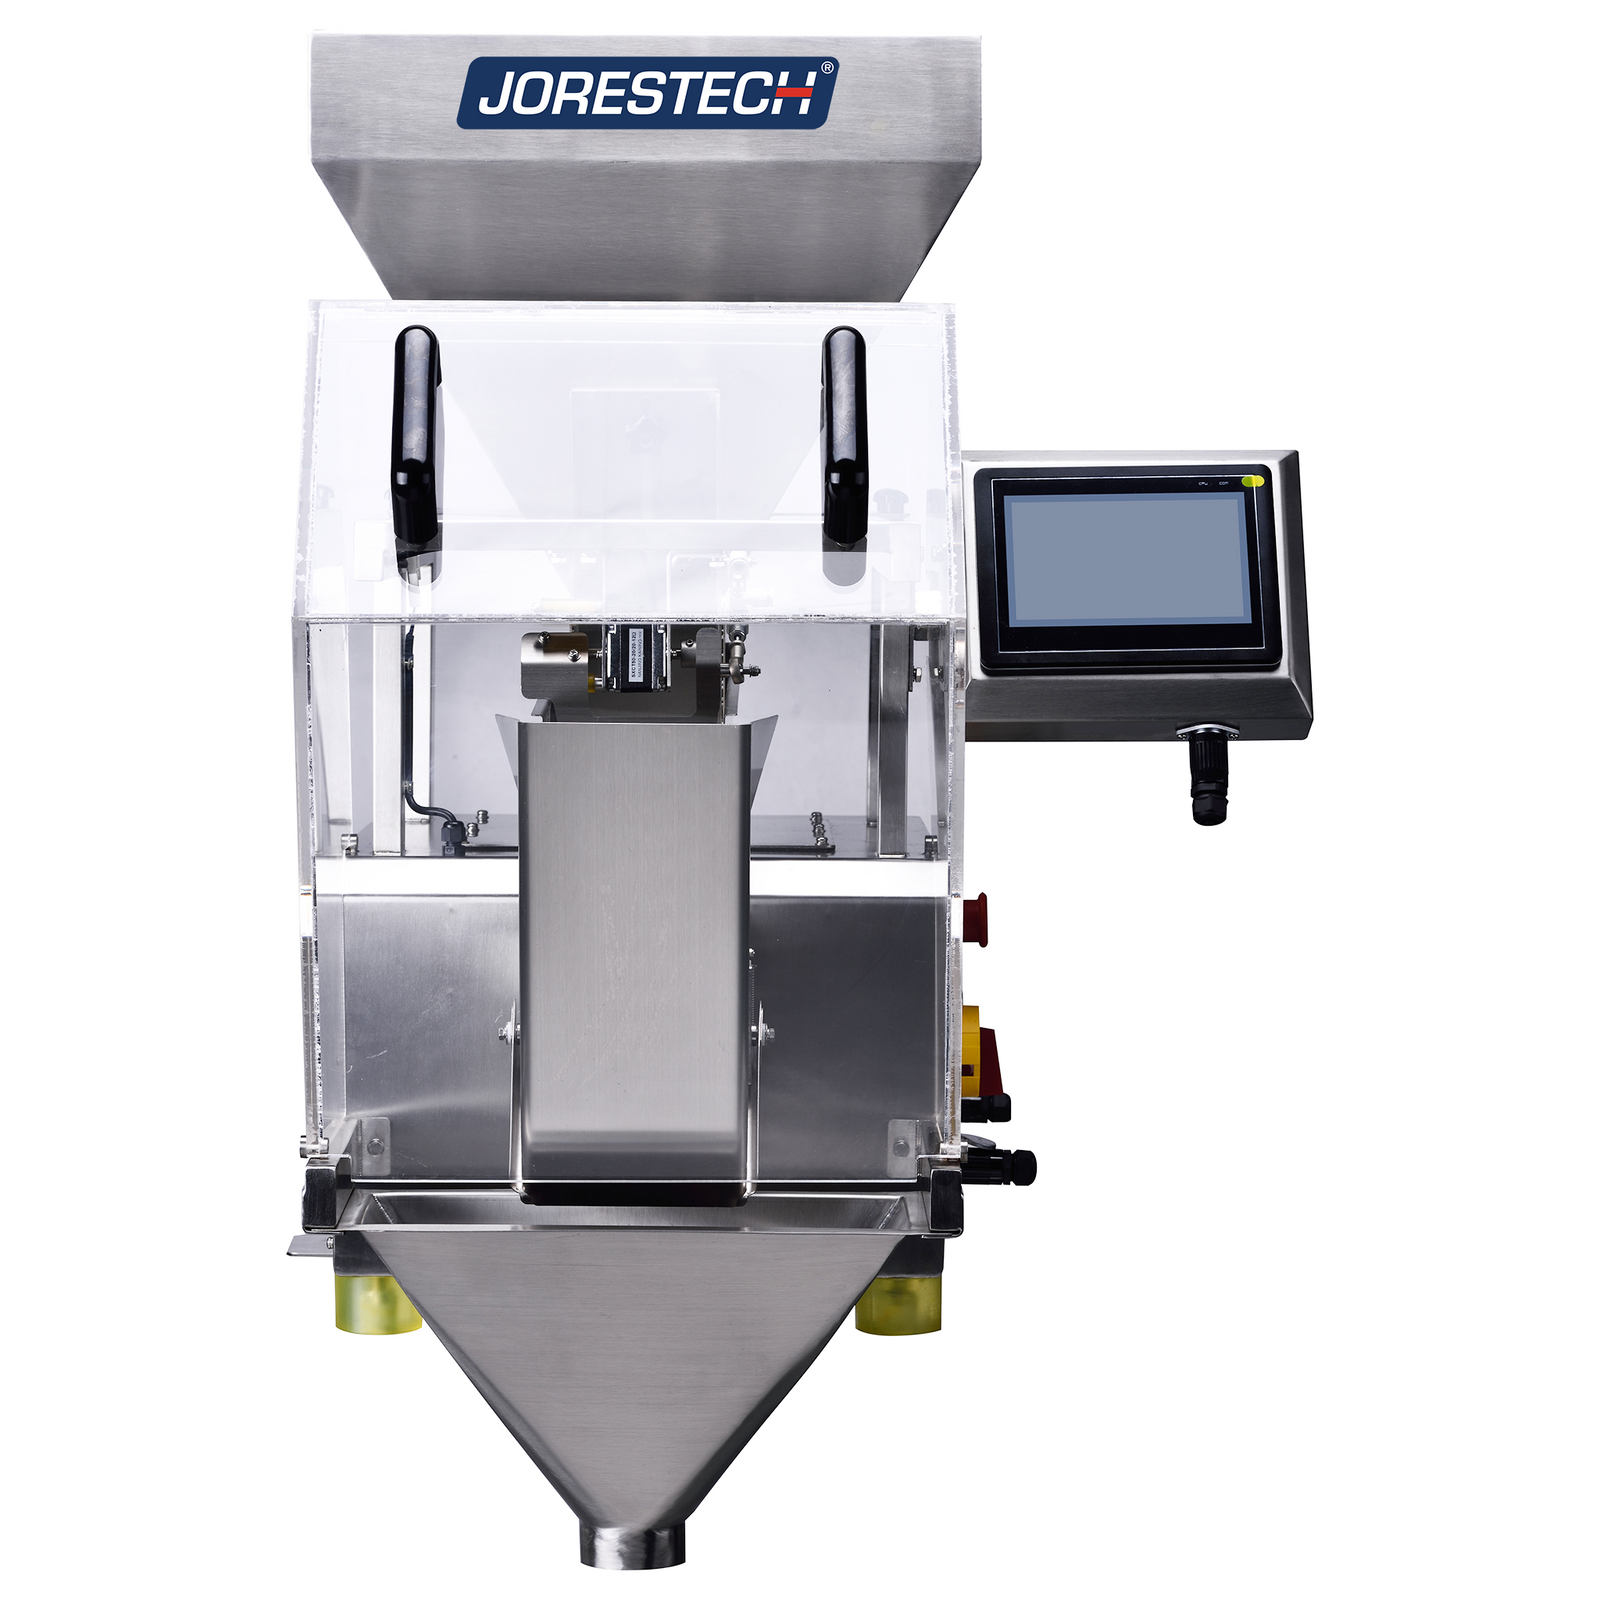 Frontal view of a stainless steel linear weighing machine with a JORES TECHNOLOGIES® sticker 